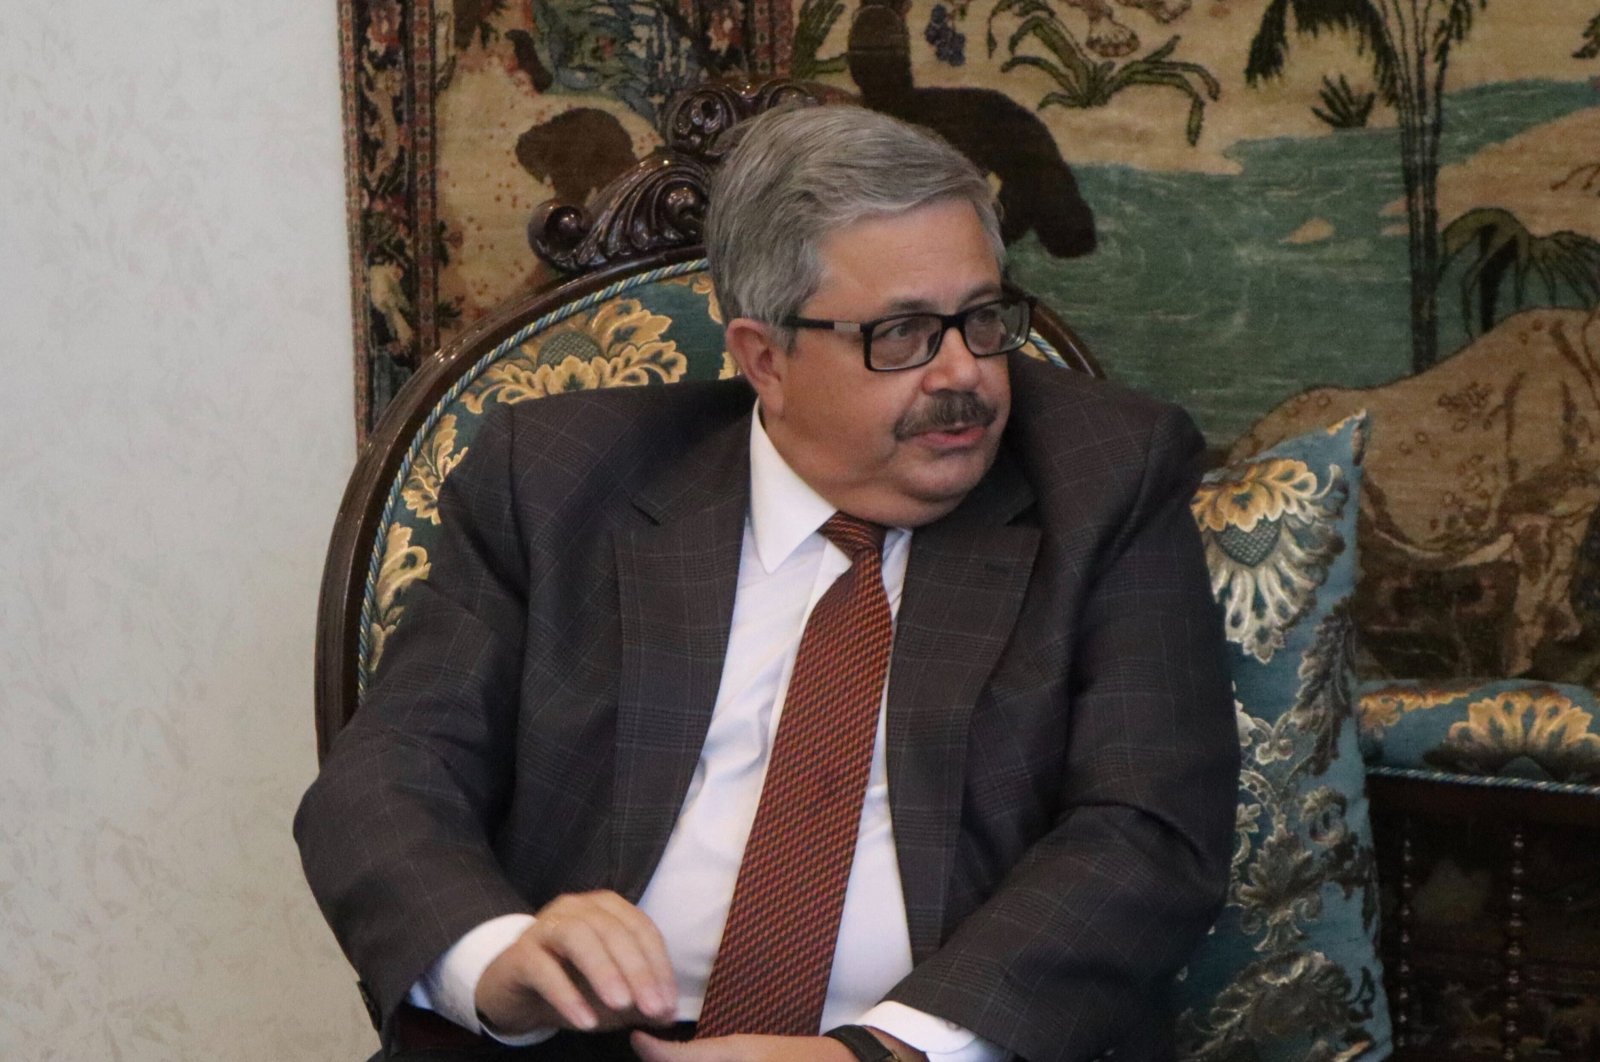 Russian Ambassador Aleksei Erkhov during an interview with Daily Sabah at the embassy in the capital Ankara, Turkey, Oct. 21, 2019 (Daily Sabah)